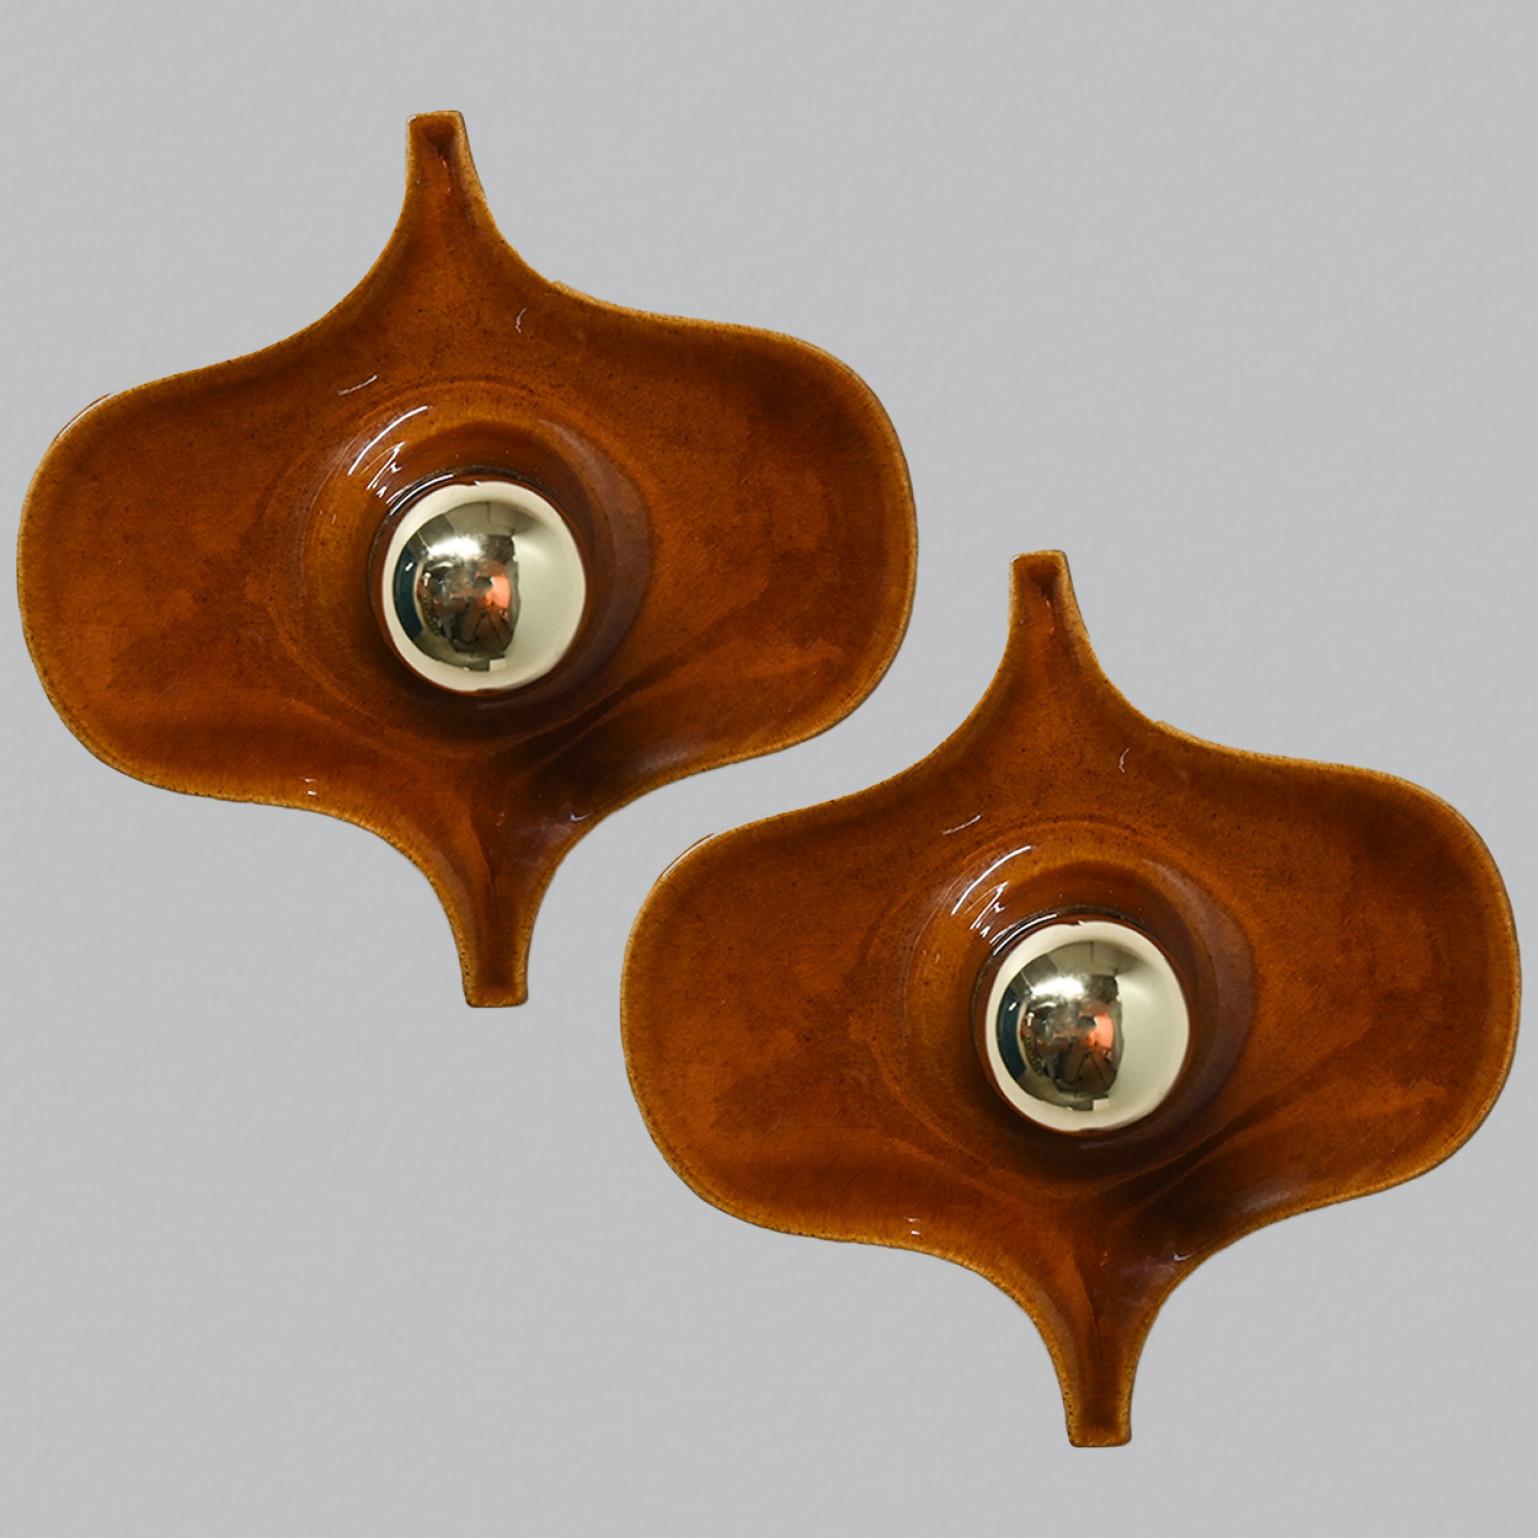 Piar of Brown ceramic wall lights in Fat Lava style. Manufactured by Hustadt Leuchten Keramik, Germany in the 1970s.

Measurements:
Width: 8.26 in (21 cm)
Heigth: 7.87 in (20 cm)
Depth: 4.72 in (12 cm)

Please note the price is for a pair. We have a